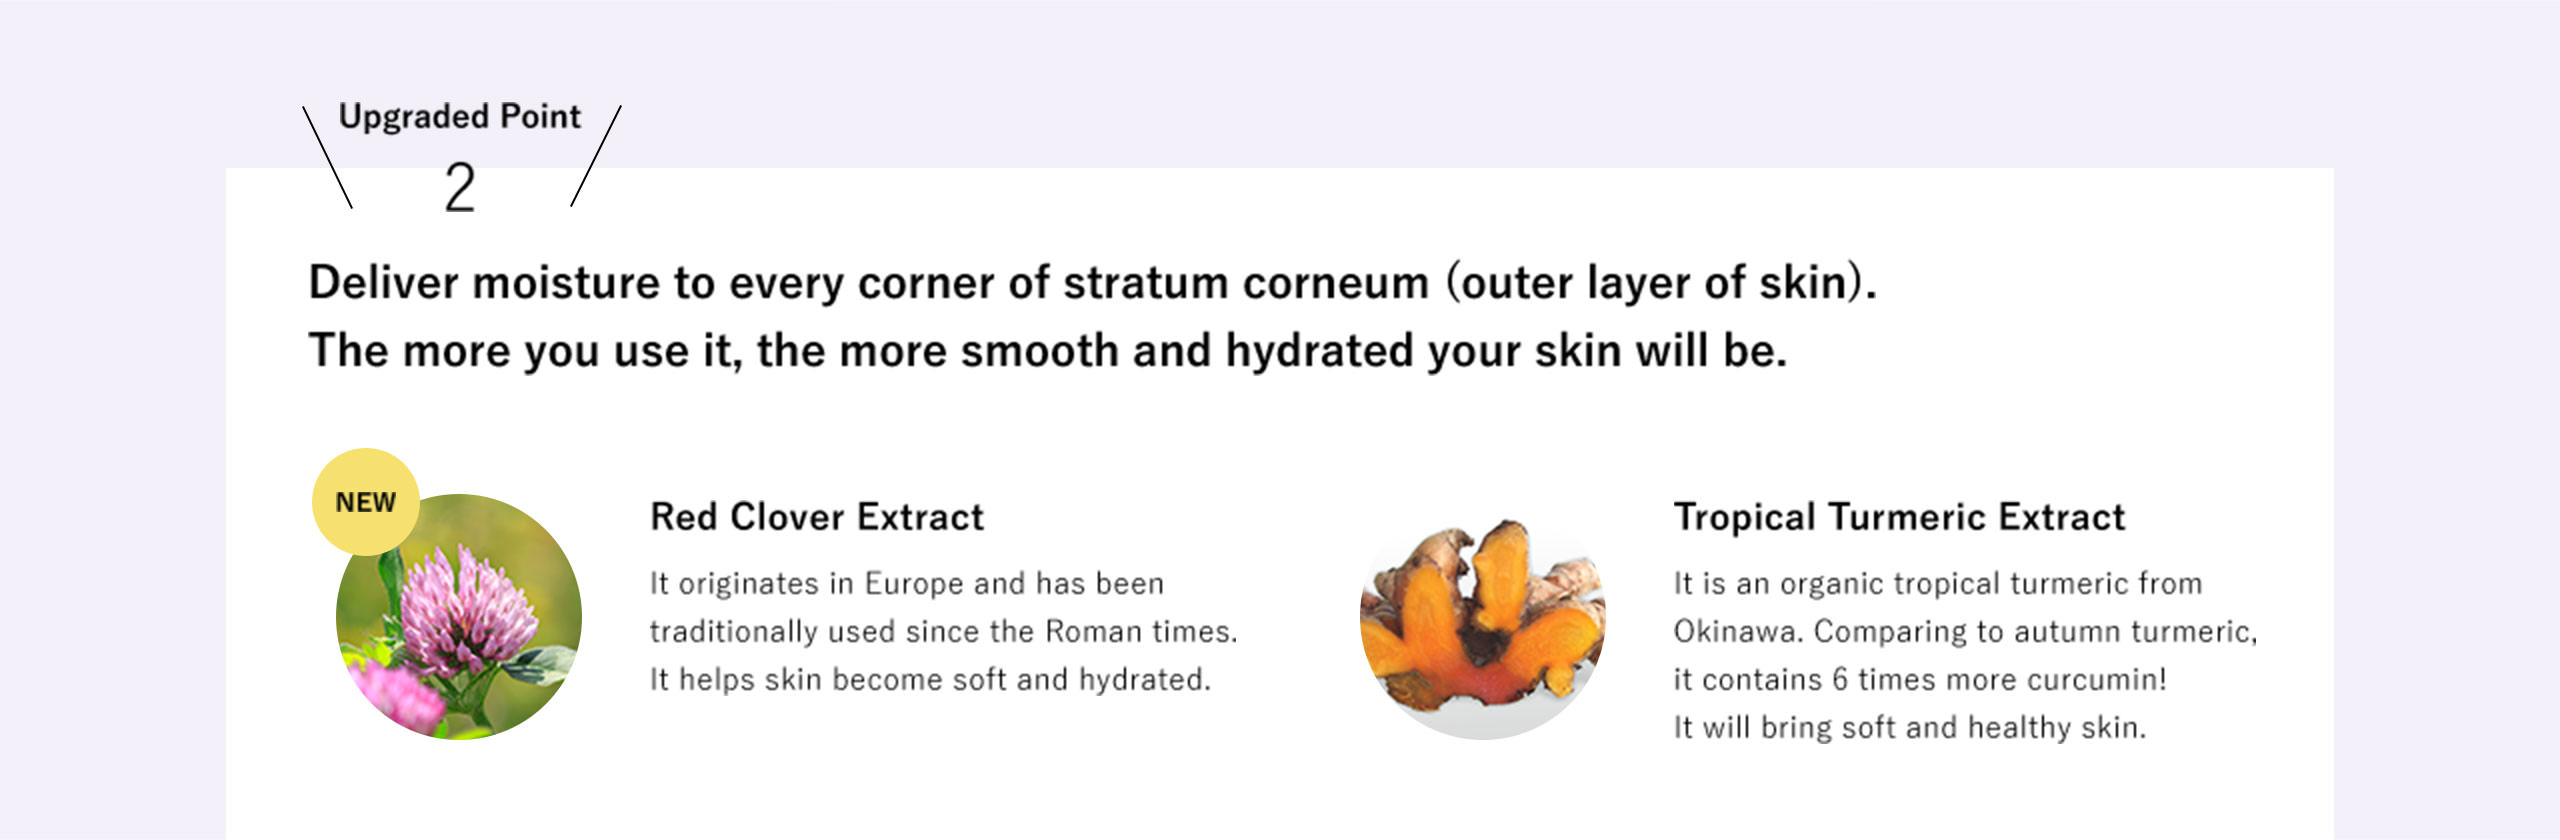 Upgraded Point 2: Deliver moisture to every corner of stratum corneum (outer layer of skin). The more you use it, the more smooth and hydrated your skin will be.